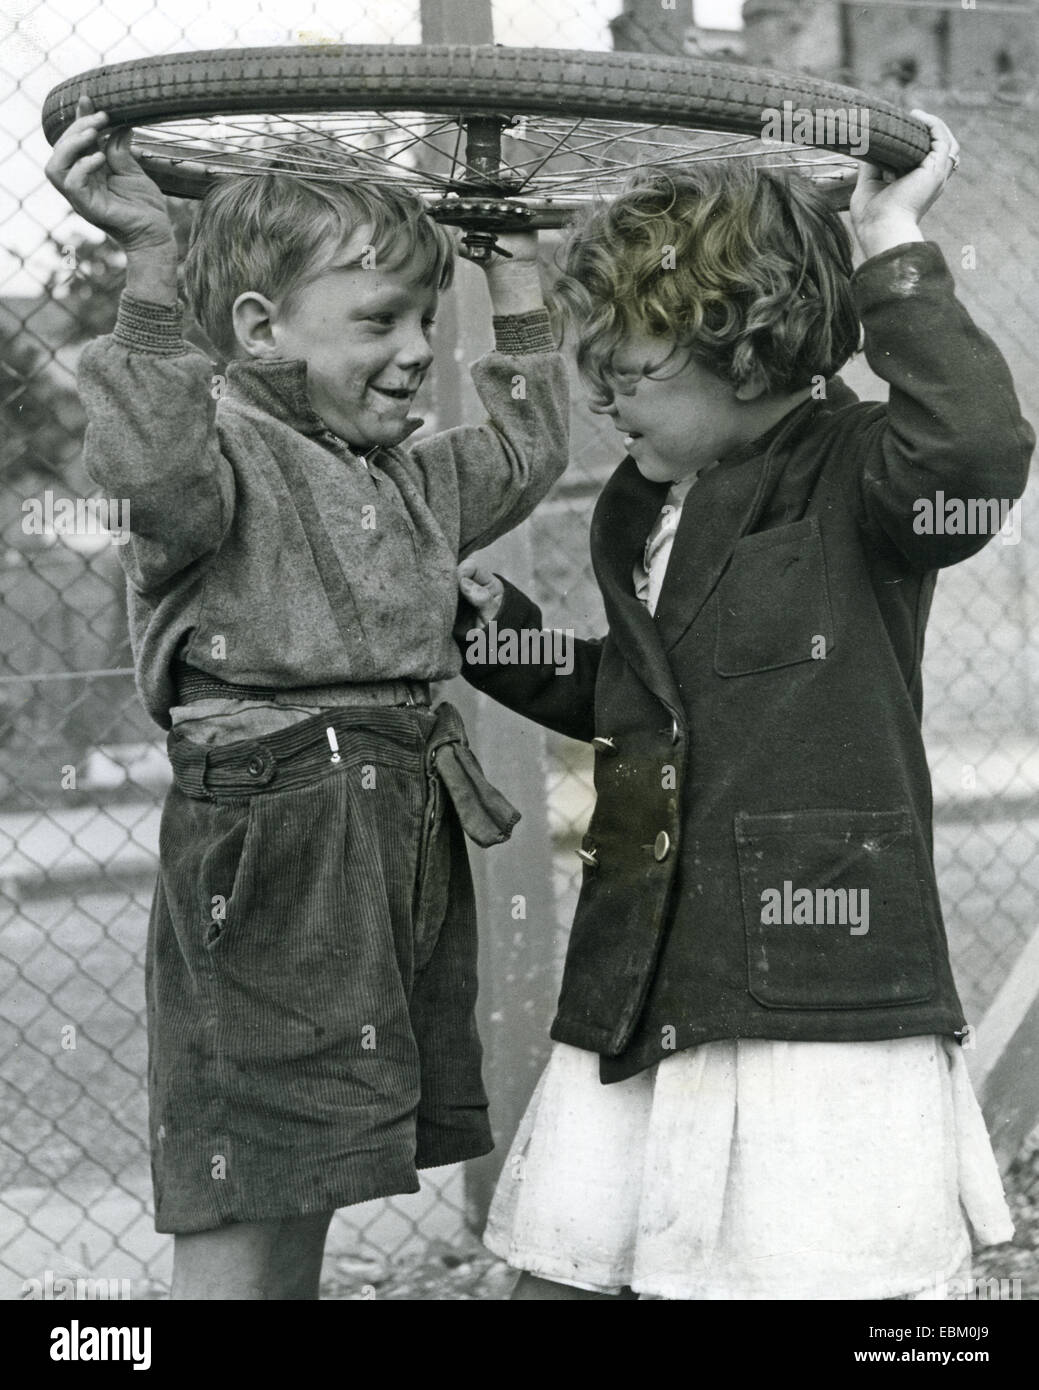 CHILDREN'S GAMES Youngsters in south London about 1958 Stock Photo